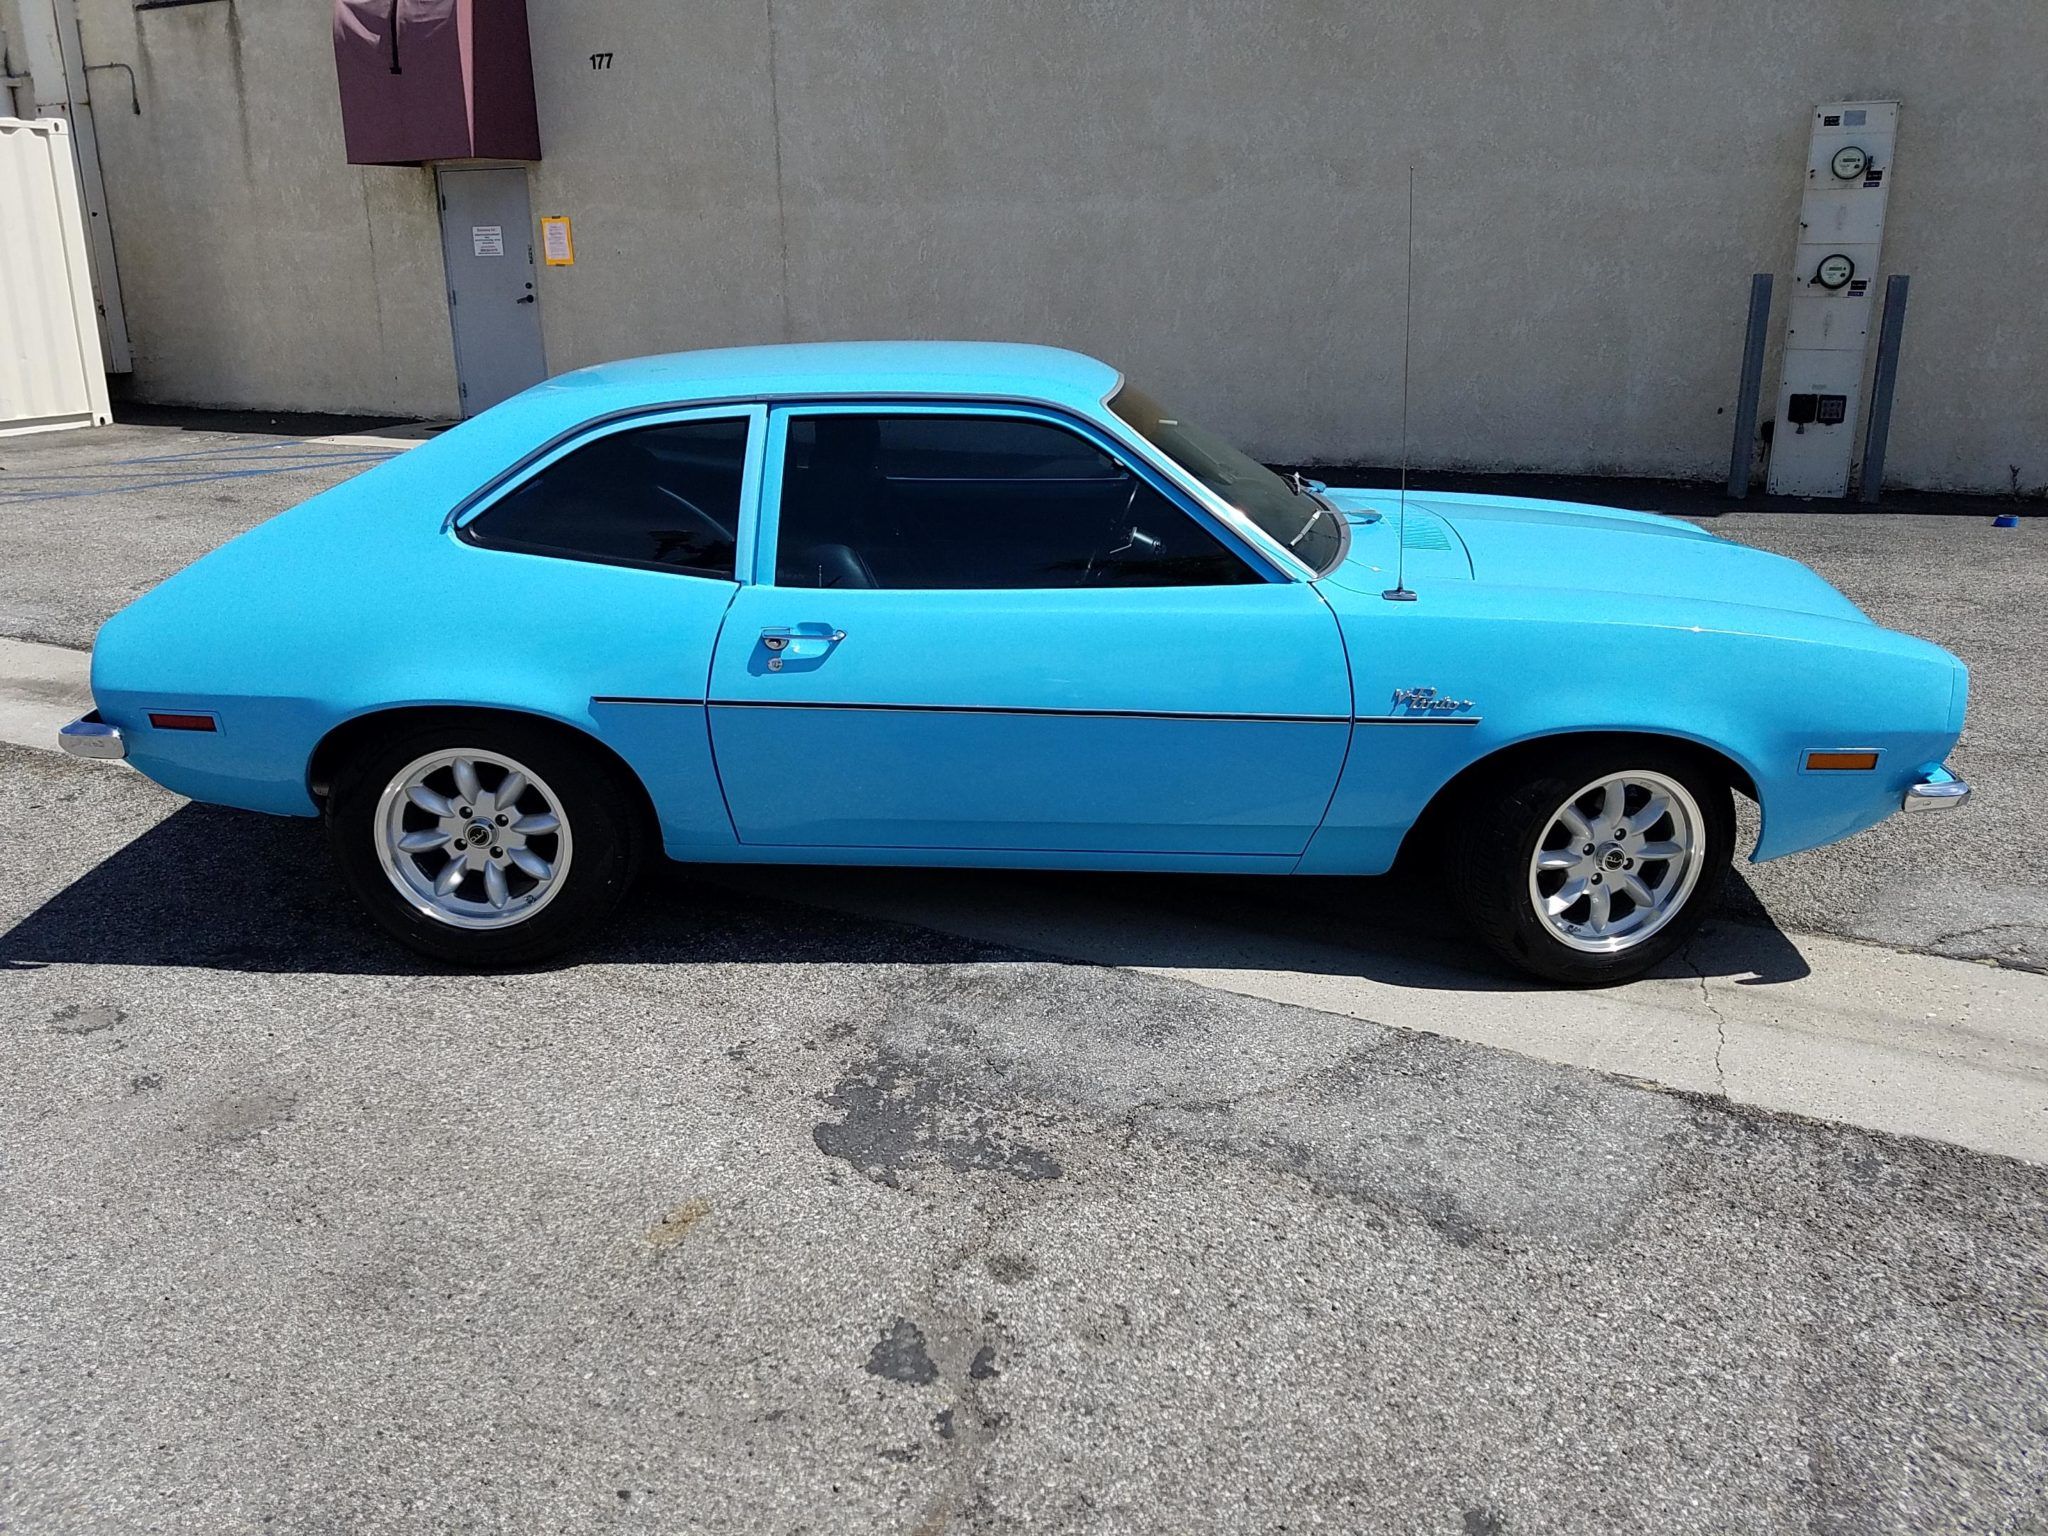 a blue 1972 Ford Pinto 5-Speed parked